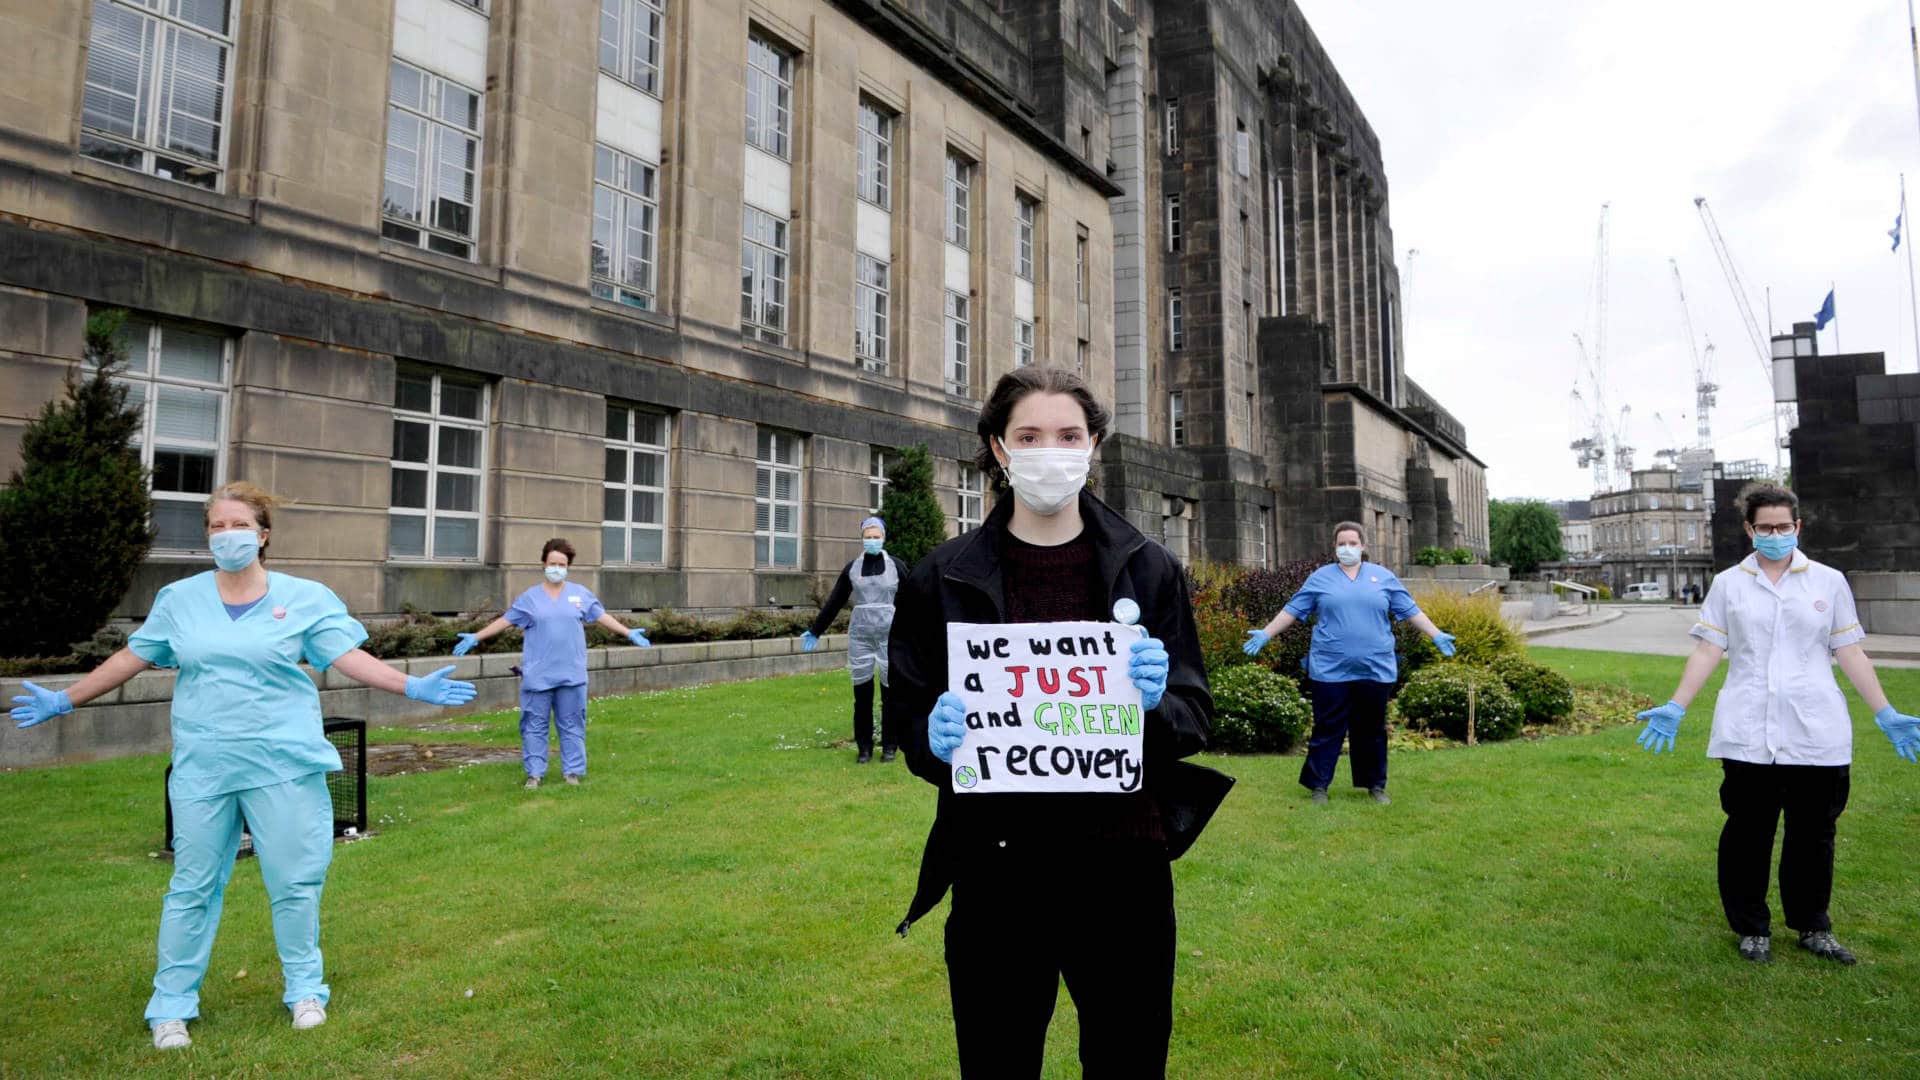 Protestors gathered outside St. Andrew’s House, Edinburgh in June to call for a coronavirus recovery plan that addresses climate and equity issues.